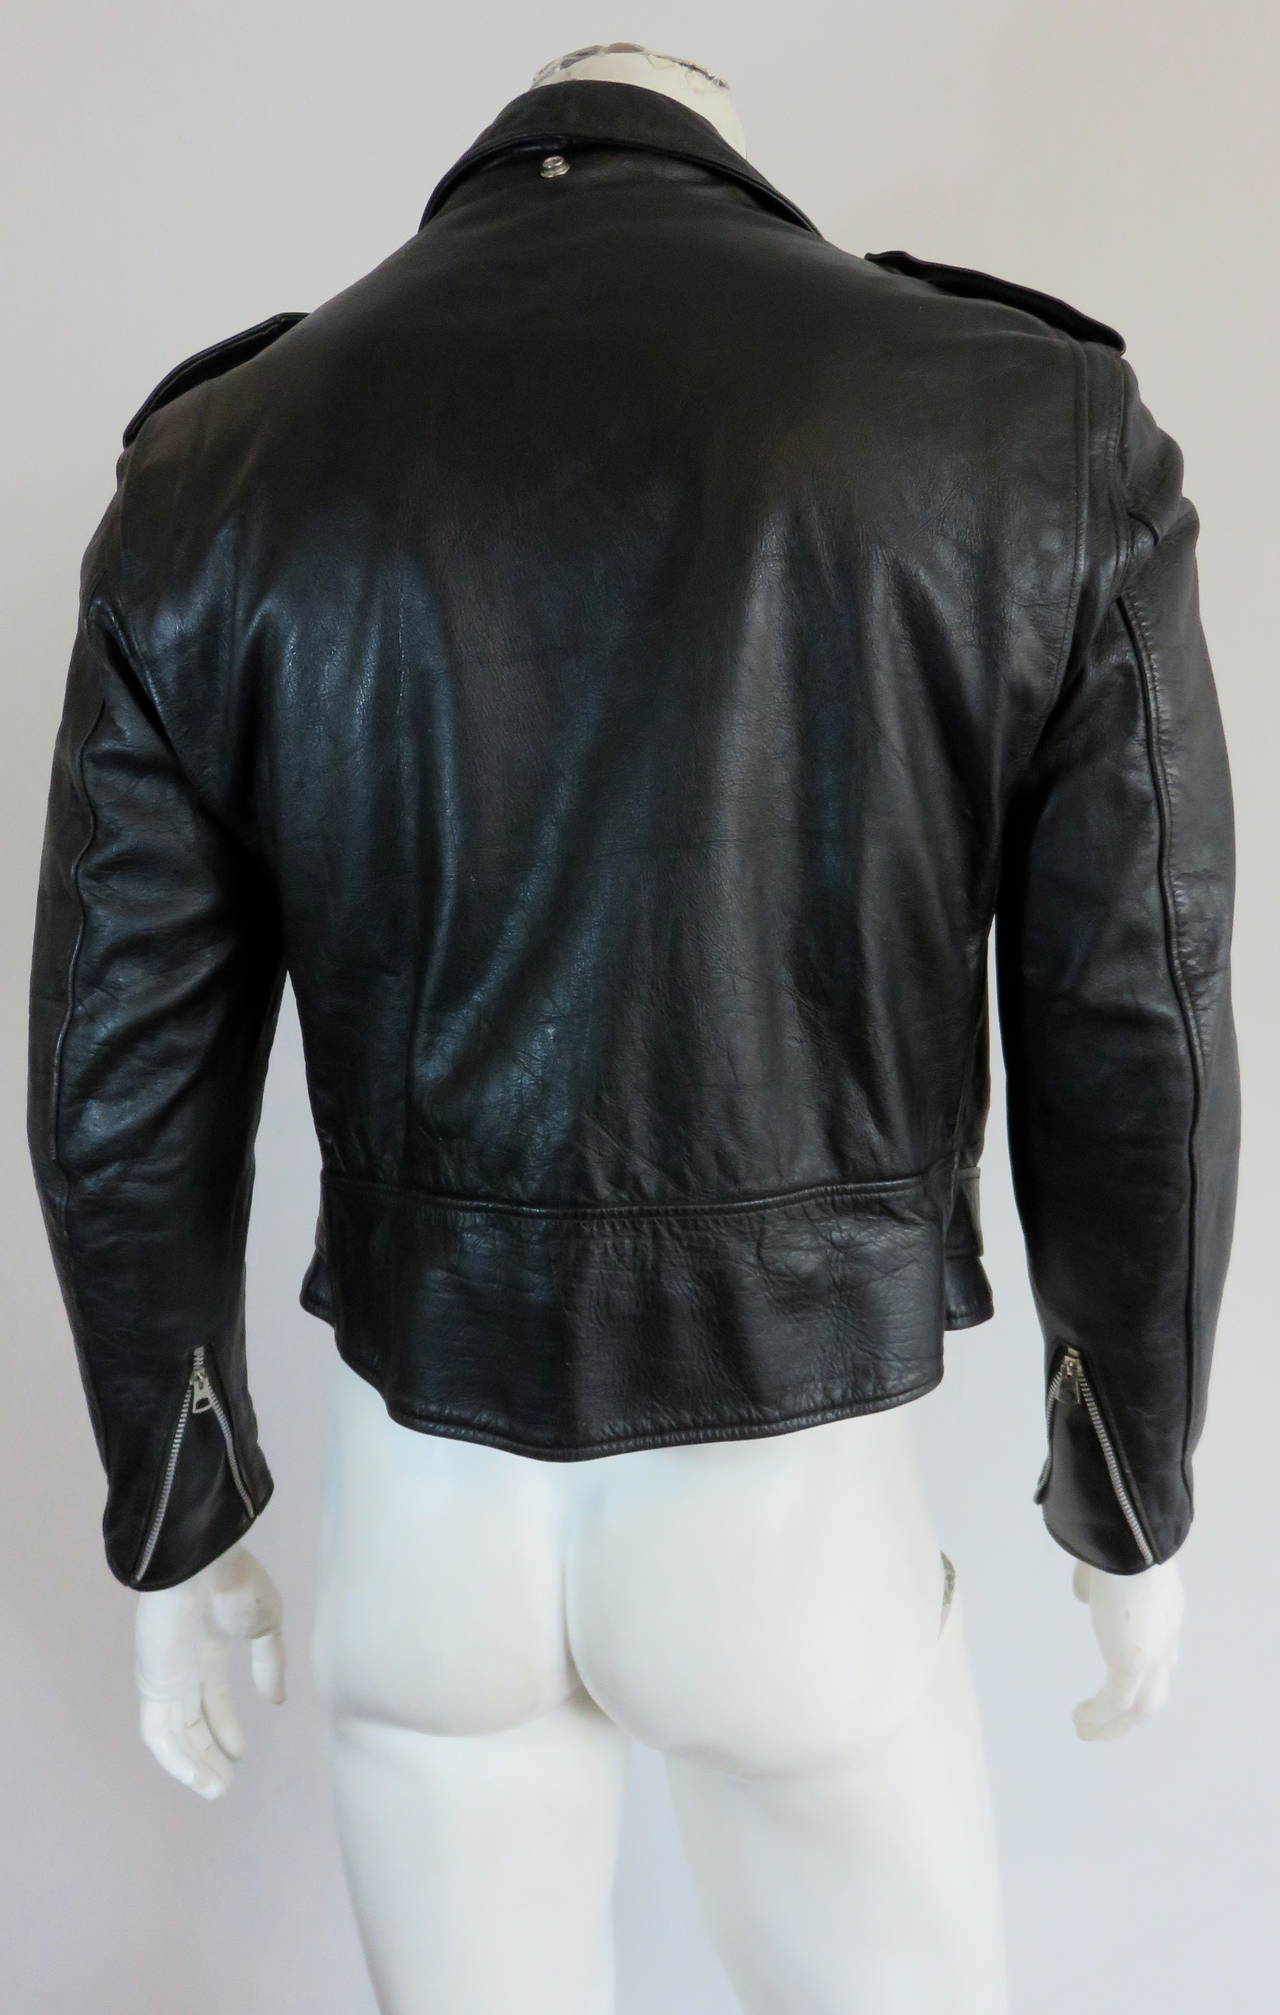 1960's SCHOTT BROS. USA Men's Perfecto leather motorcycle jacket In Good Condition For Sale In Newport Beach, CA